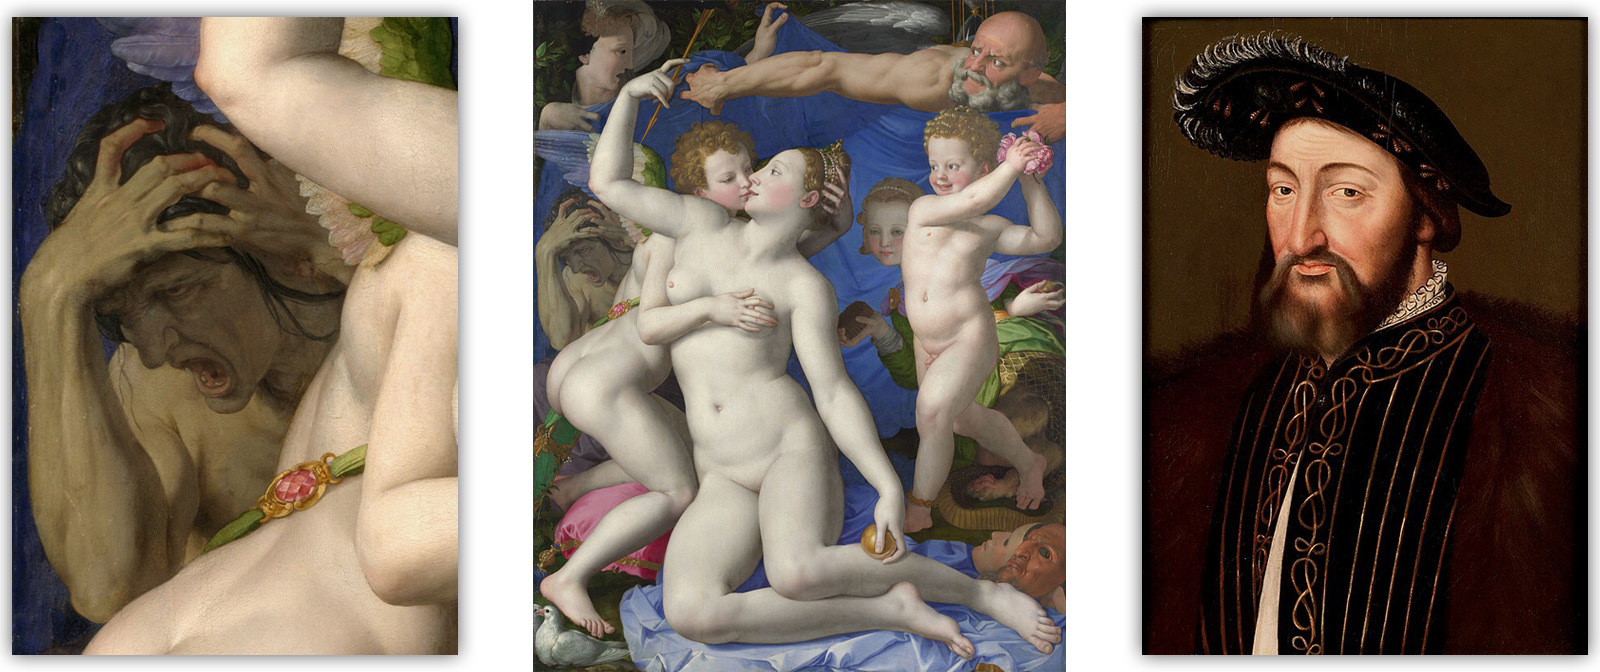 The most sensual and obscene painting of the Renaissance. We tell you about its hidden meanings